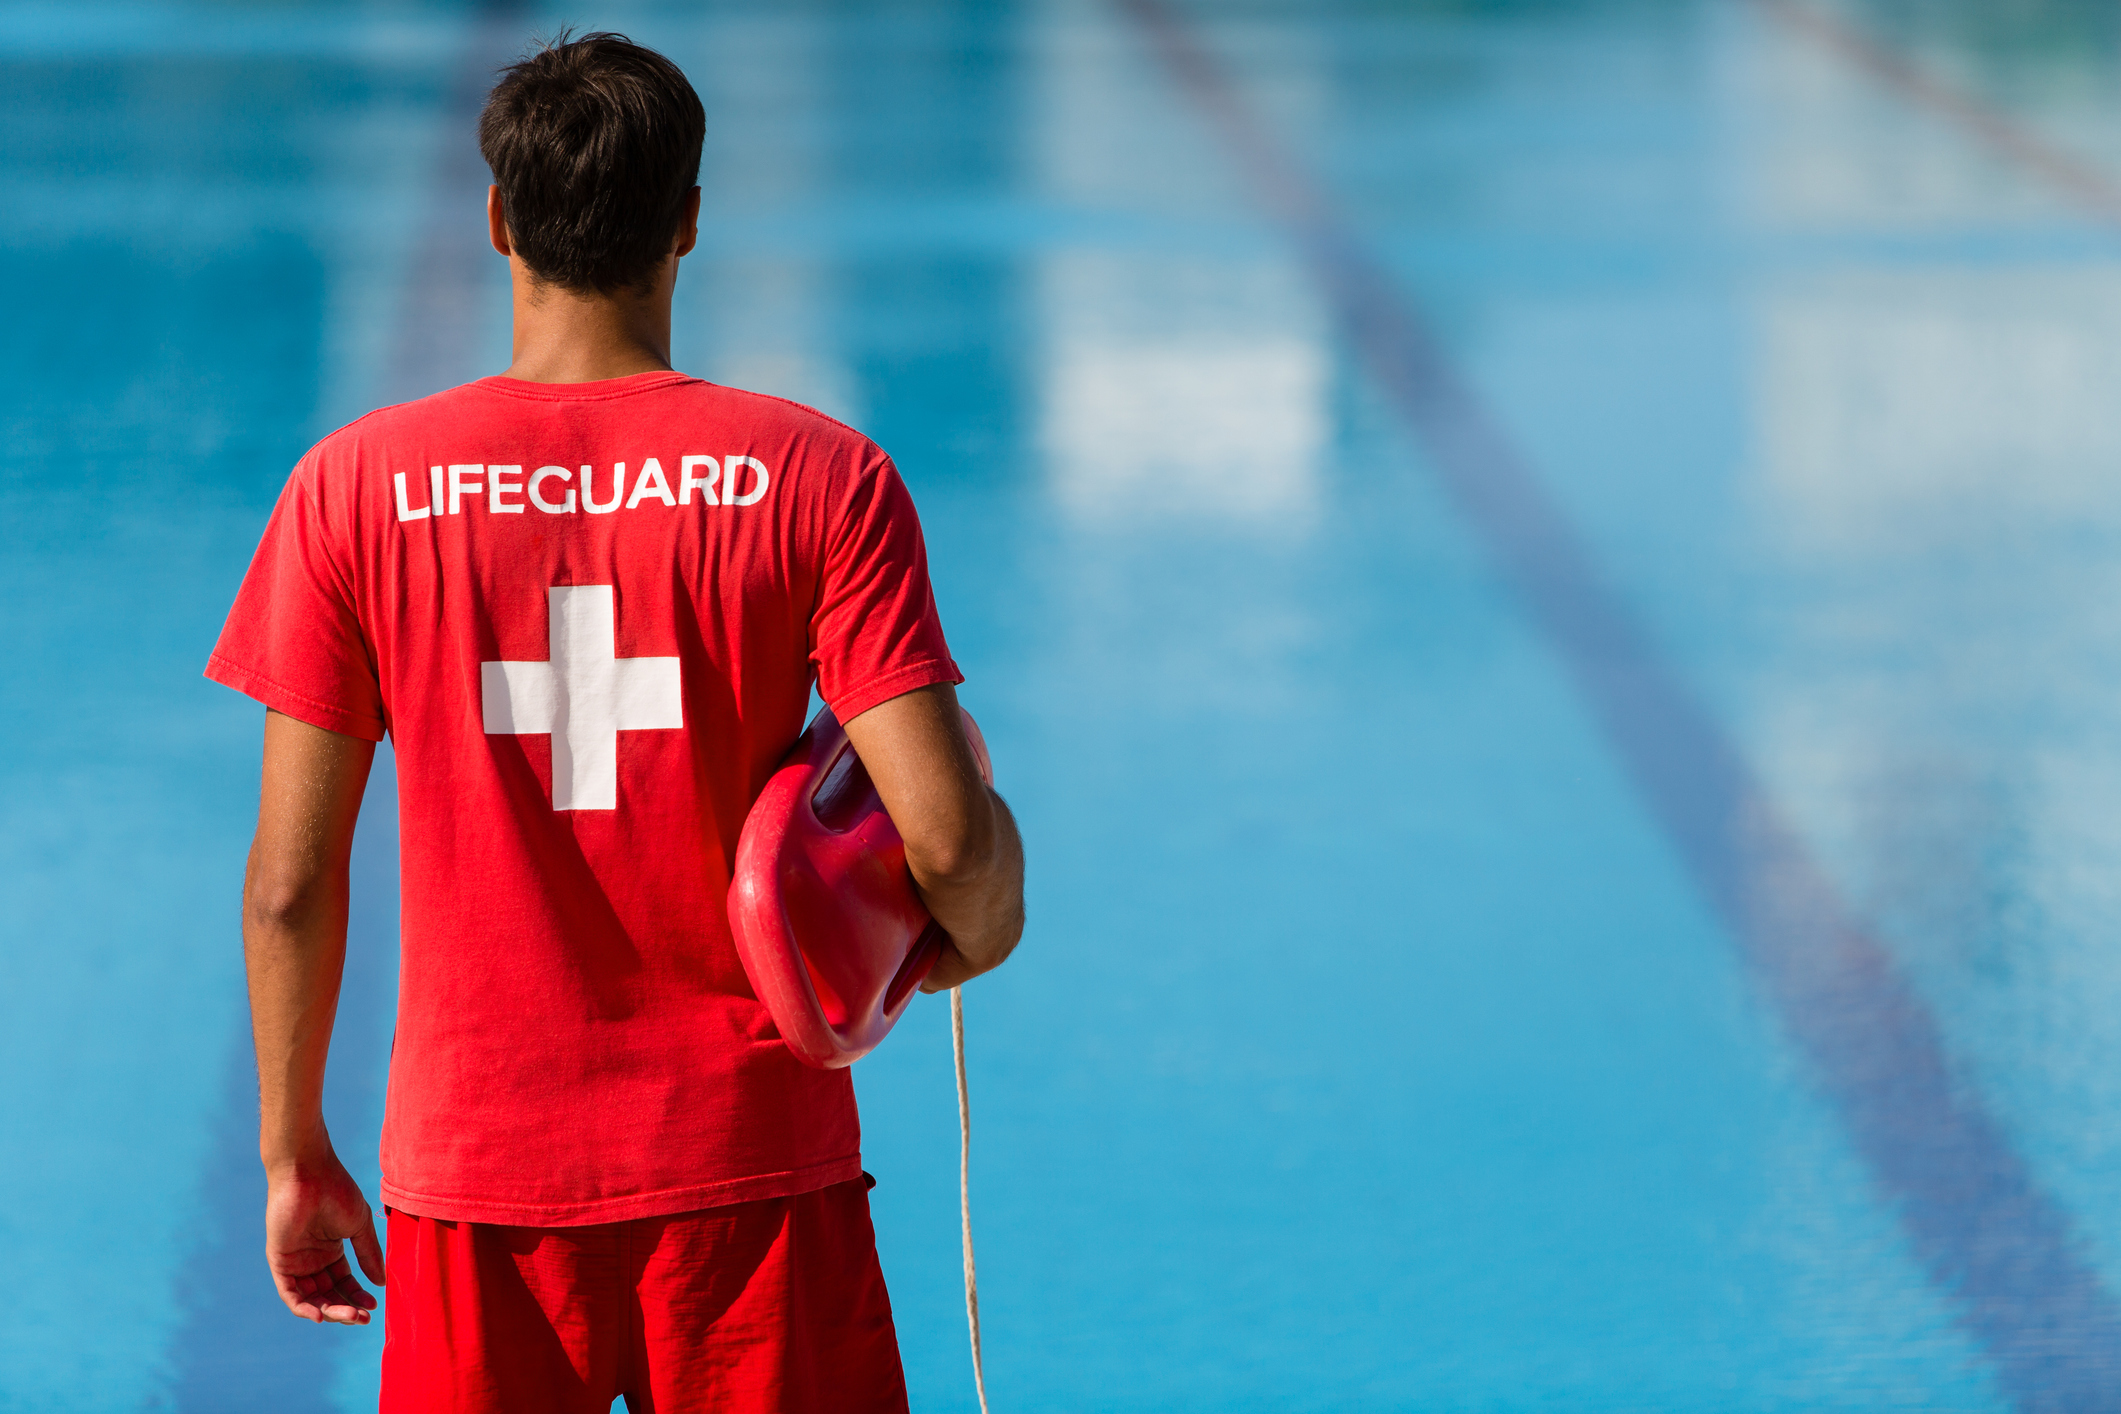 Drowning prevention: Training lifeguards with virtual reality